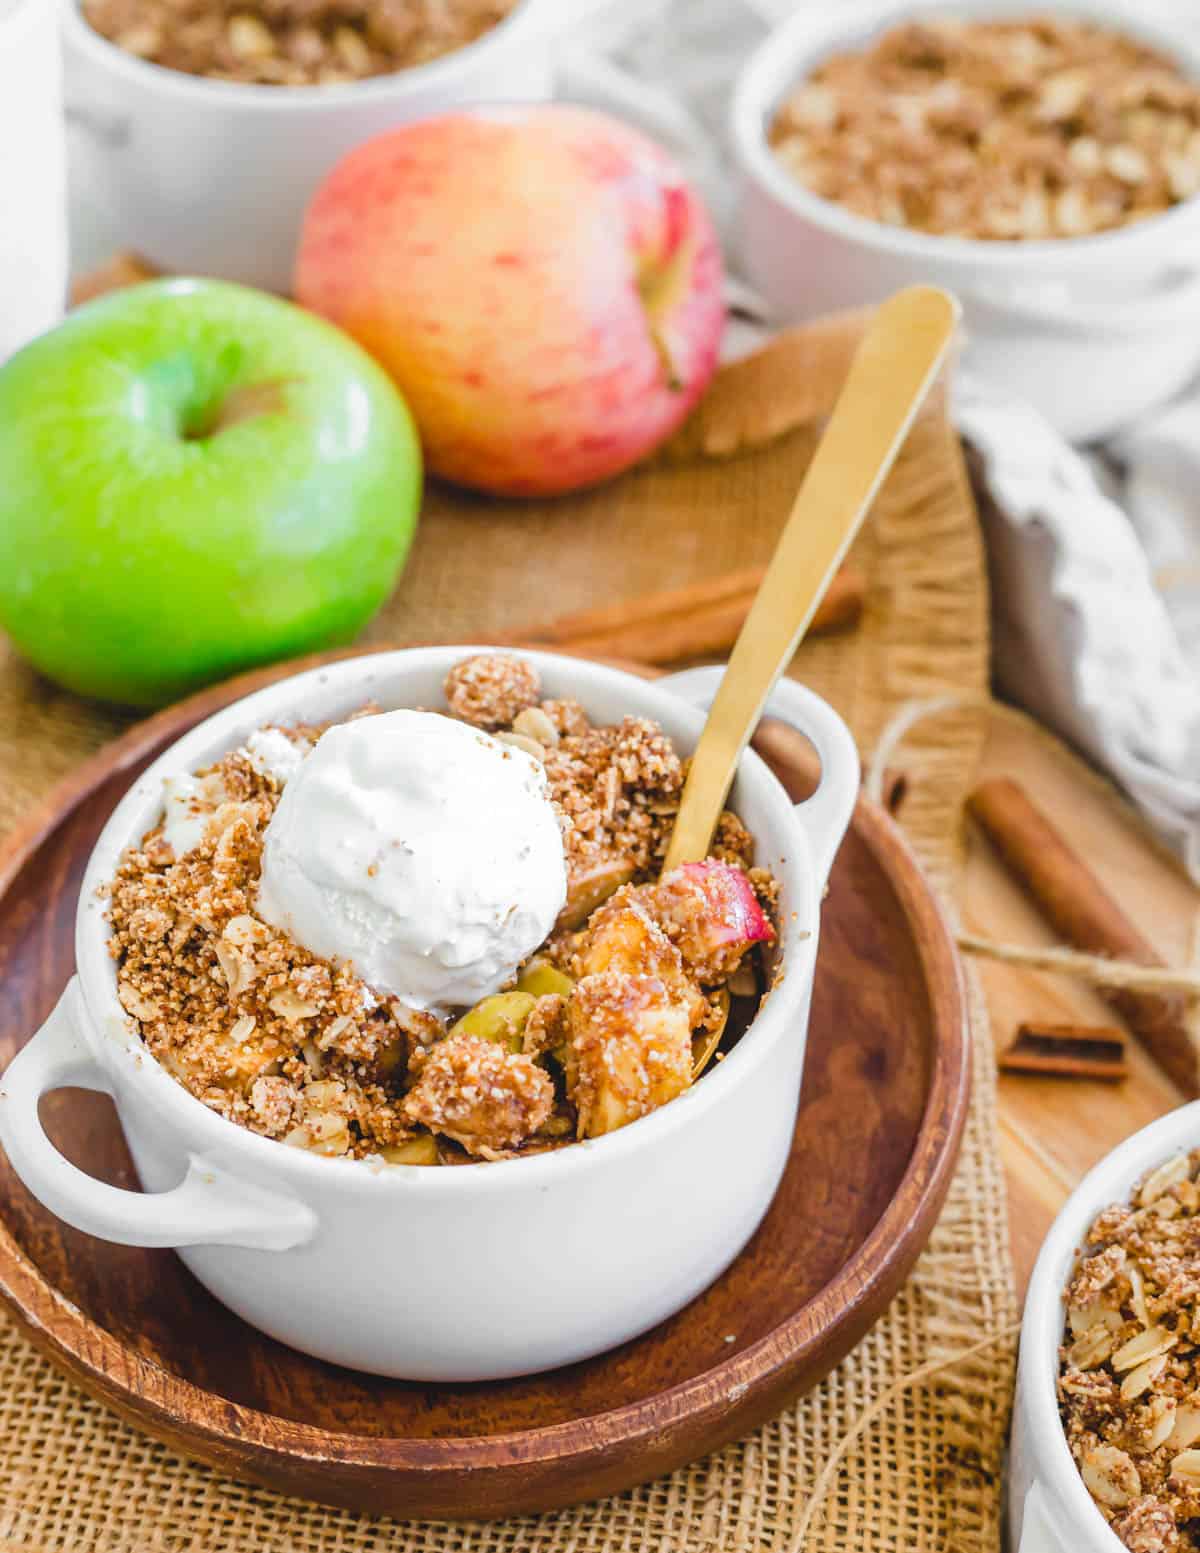 Gluten-free and vegan apple crisp made in the air fryer with a scoop of vanilla ice cream on top and a serving spoon.